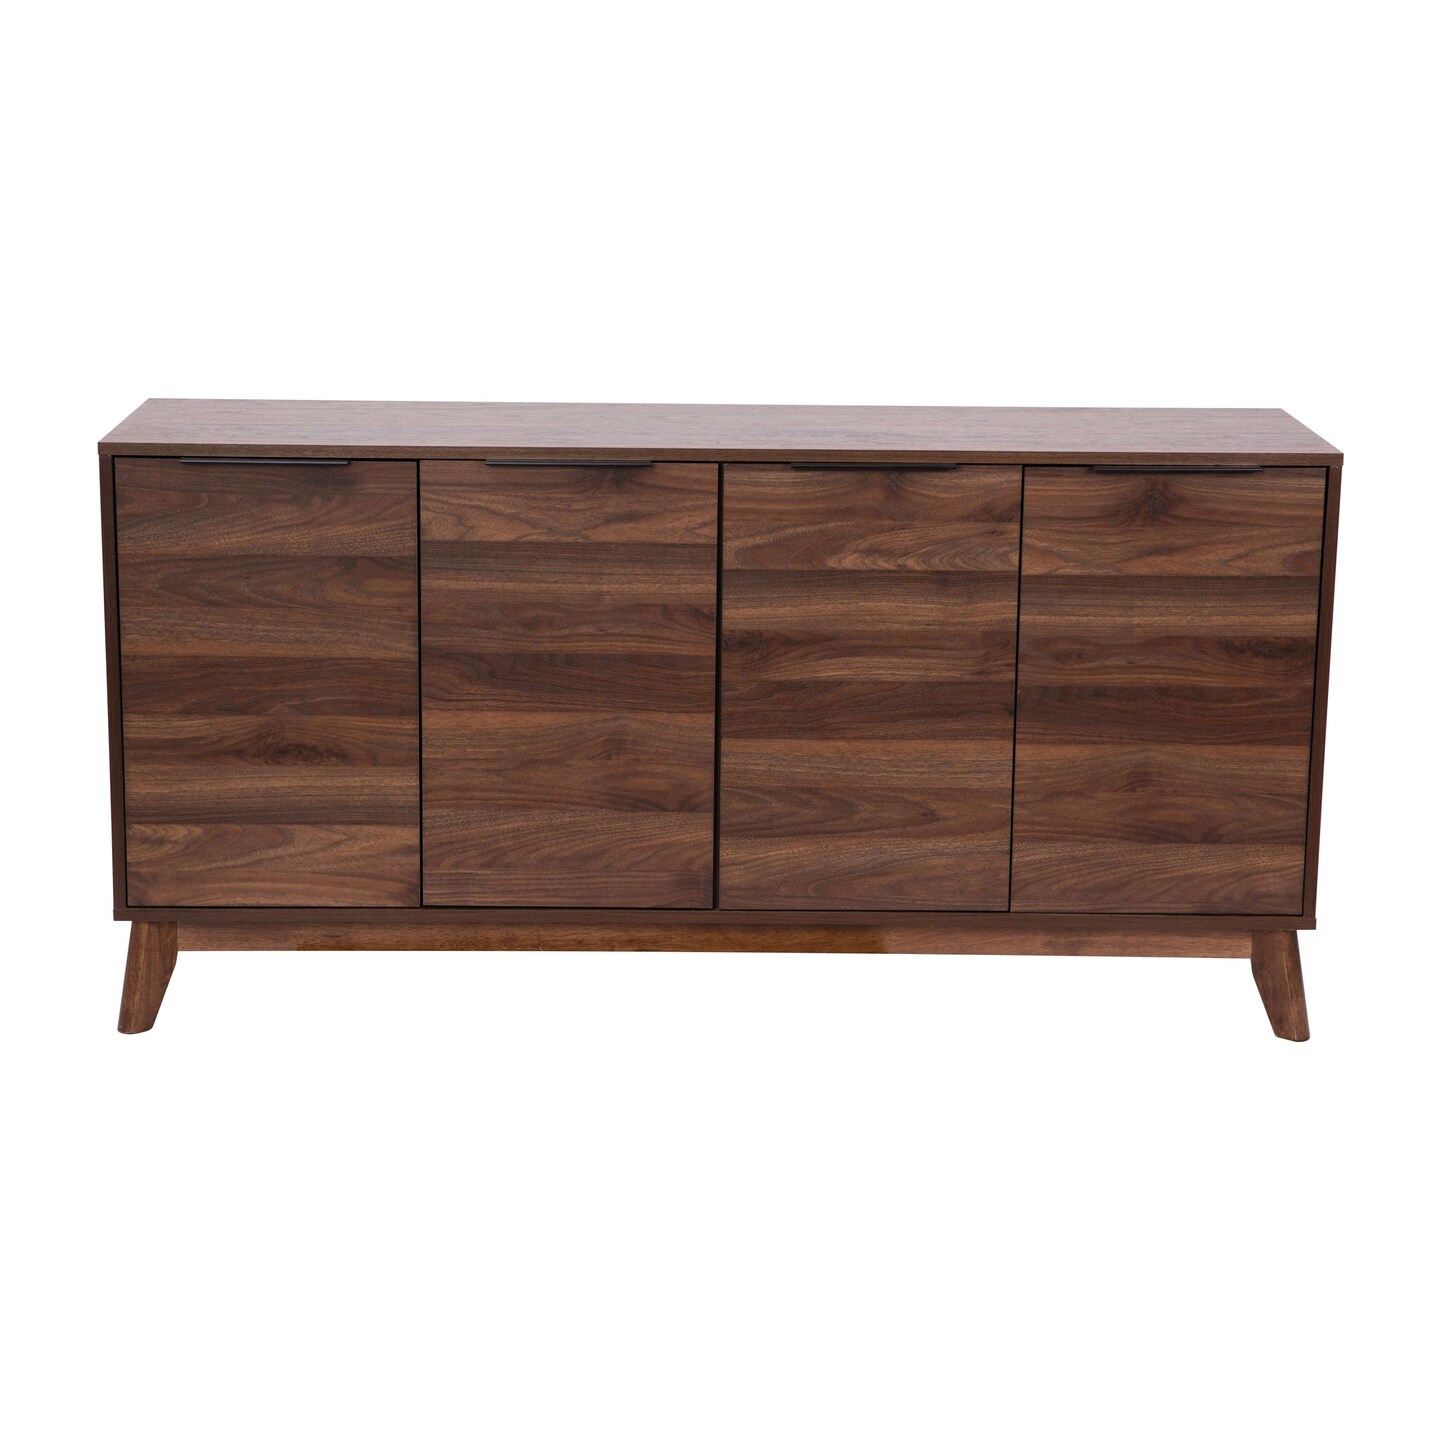 Emma and Oliver Beverly Mid-Century Modern Wooden Buffet with Soft Close Doors, Shelving and Sleek Tapered Legs with Protective Floor Glides